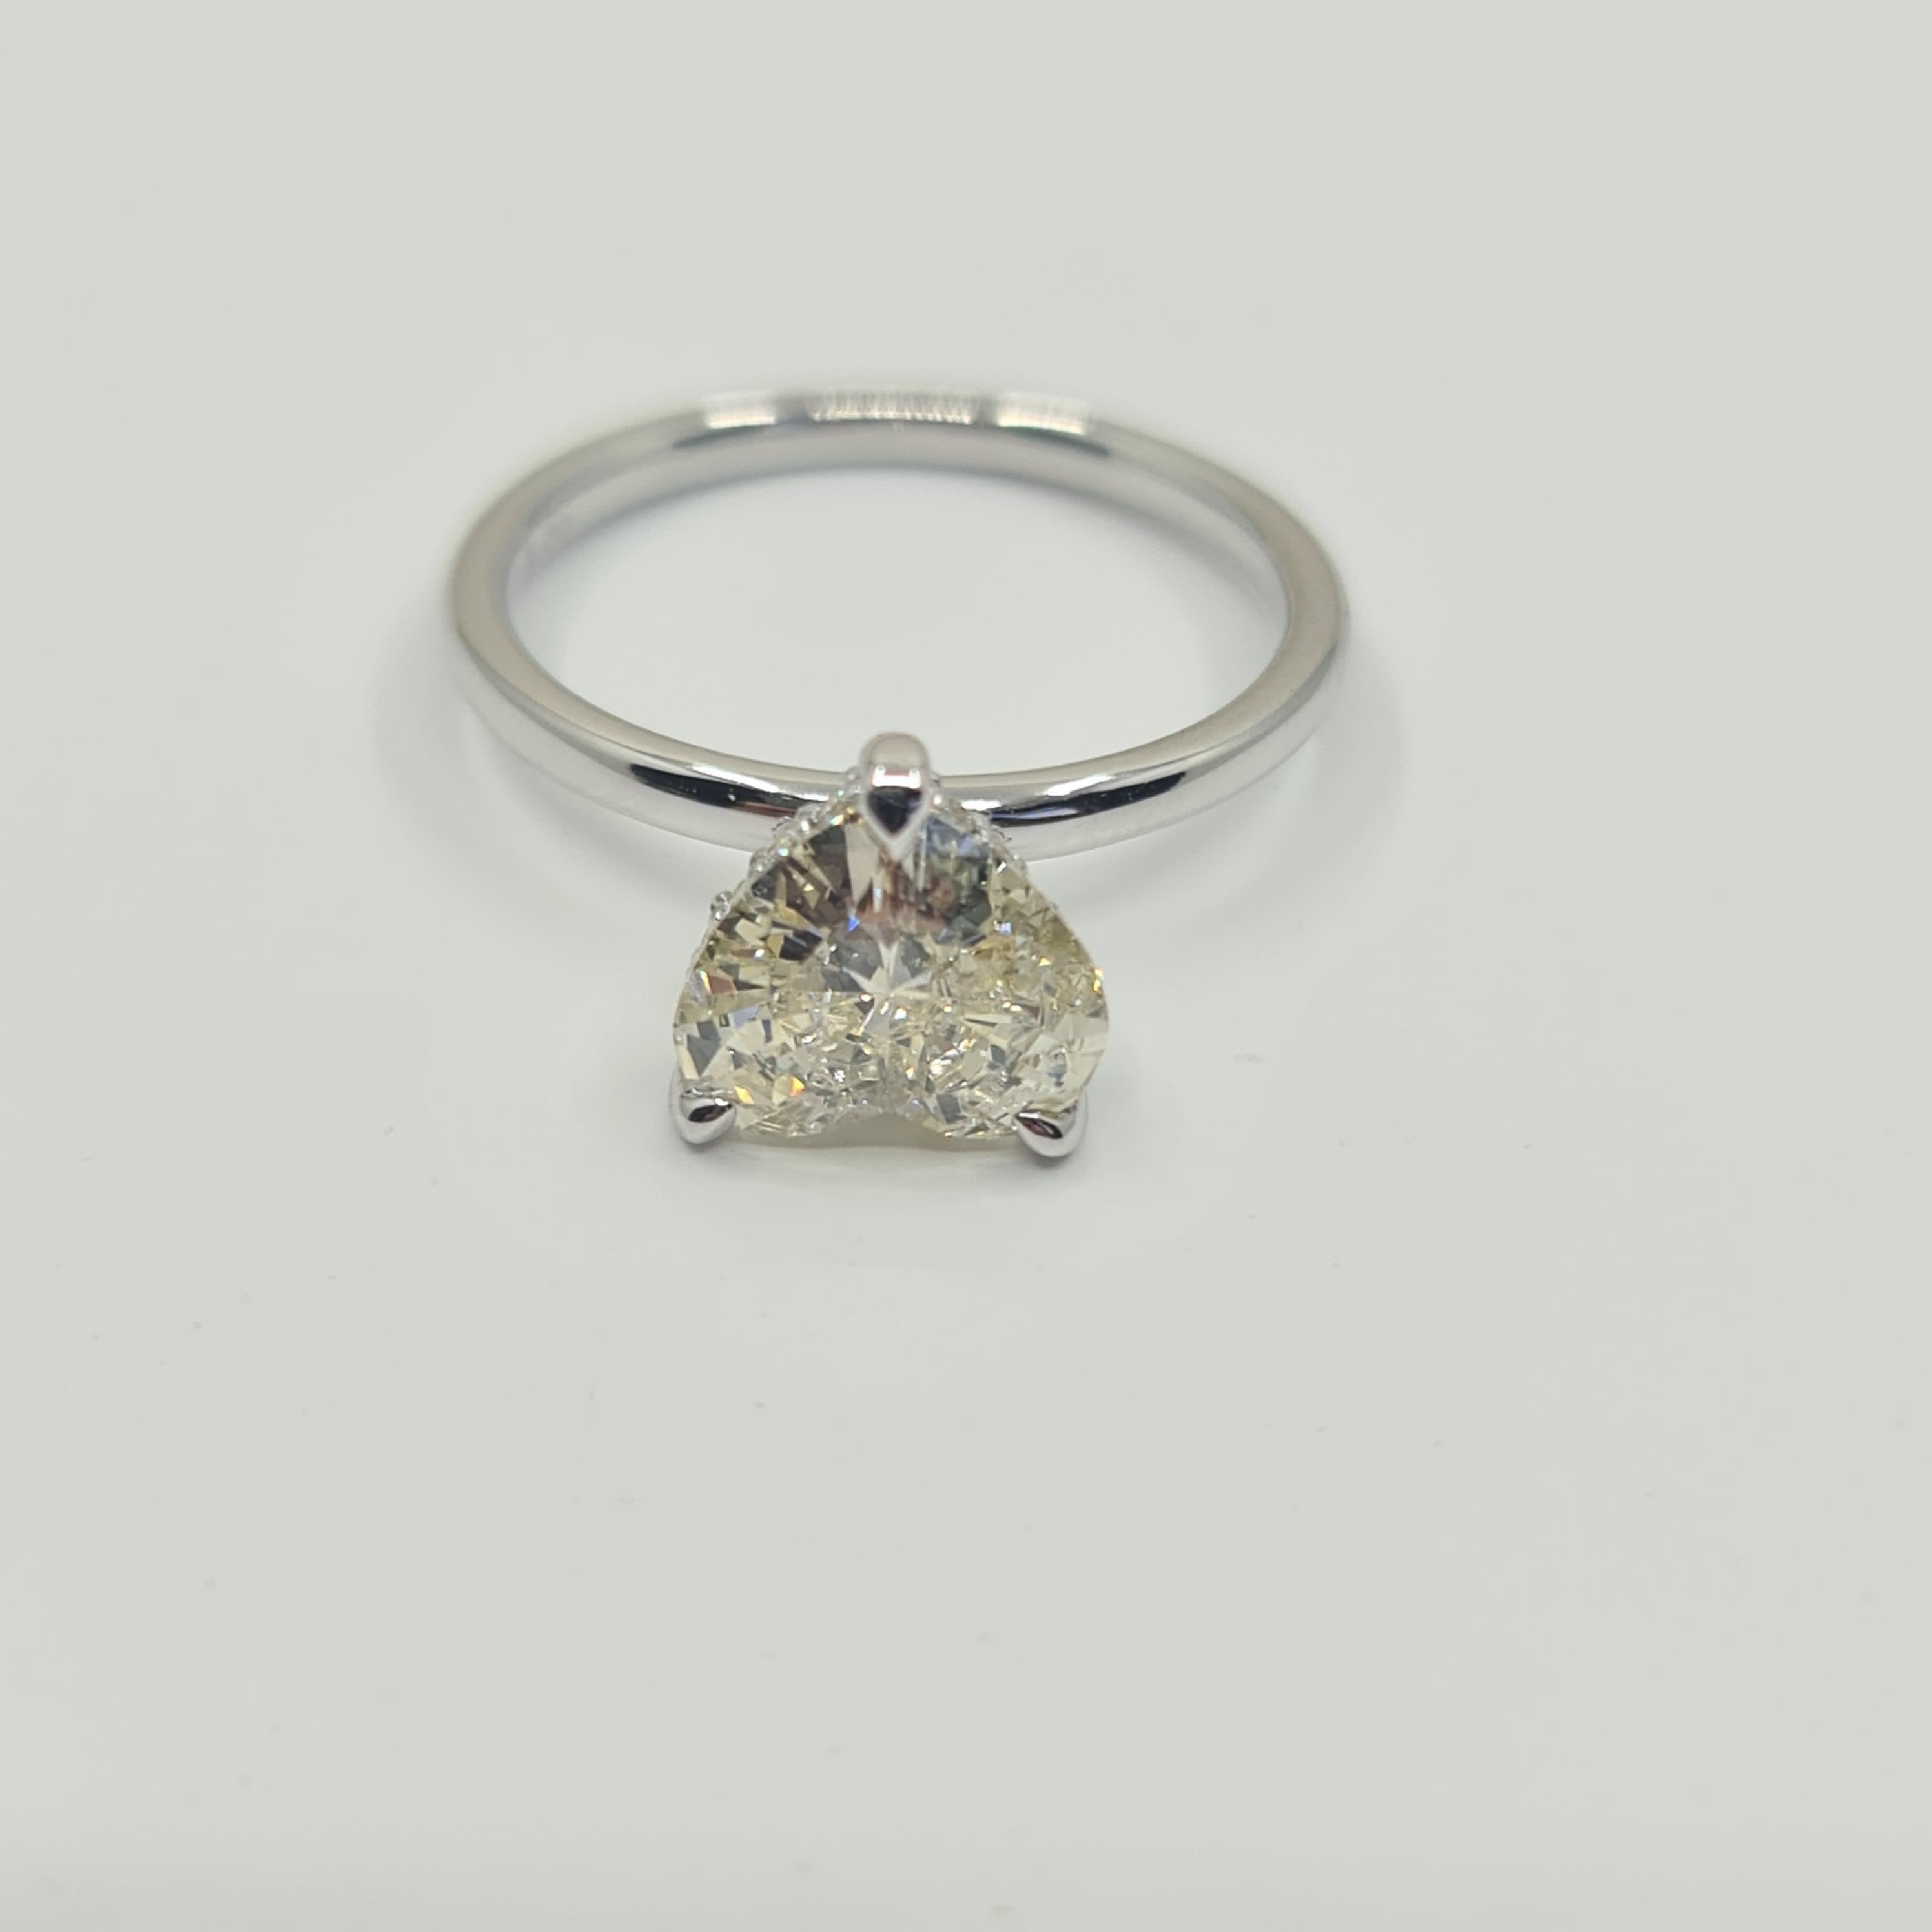 Exquisite GIA Certified 1.60 Carat Heart Diamond Ring with 0.07 Carat Halo G/VS For Sale 5